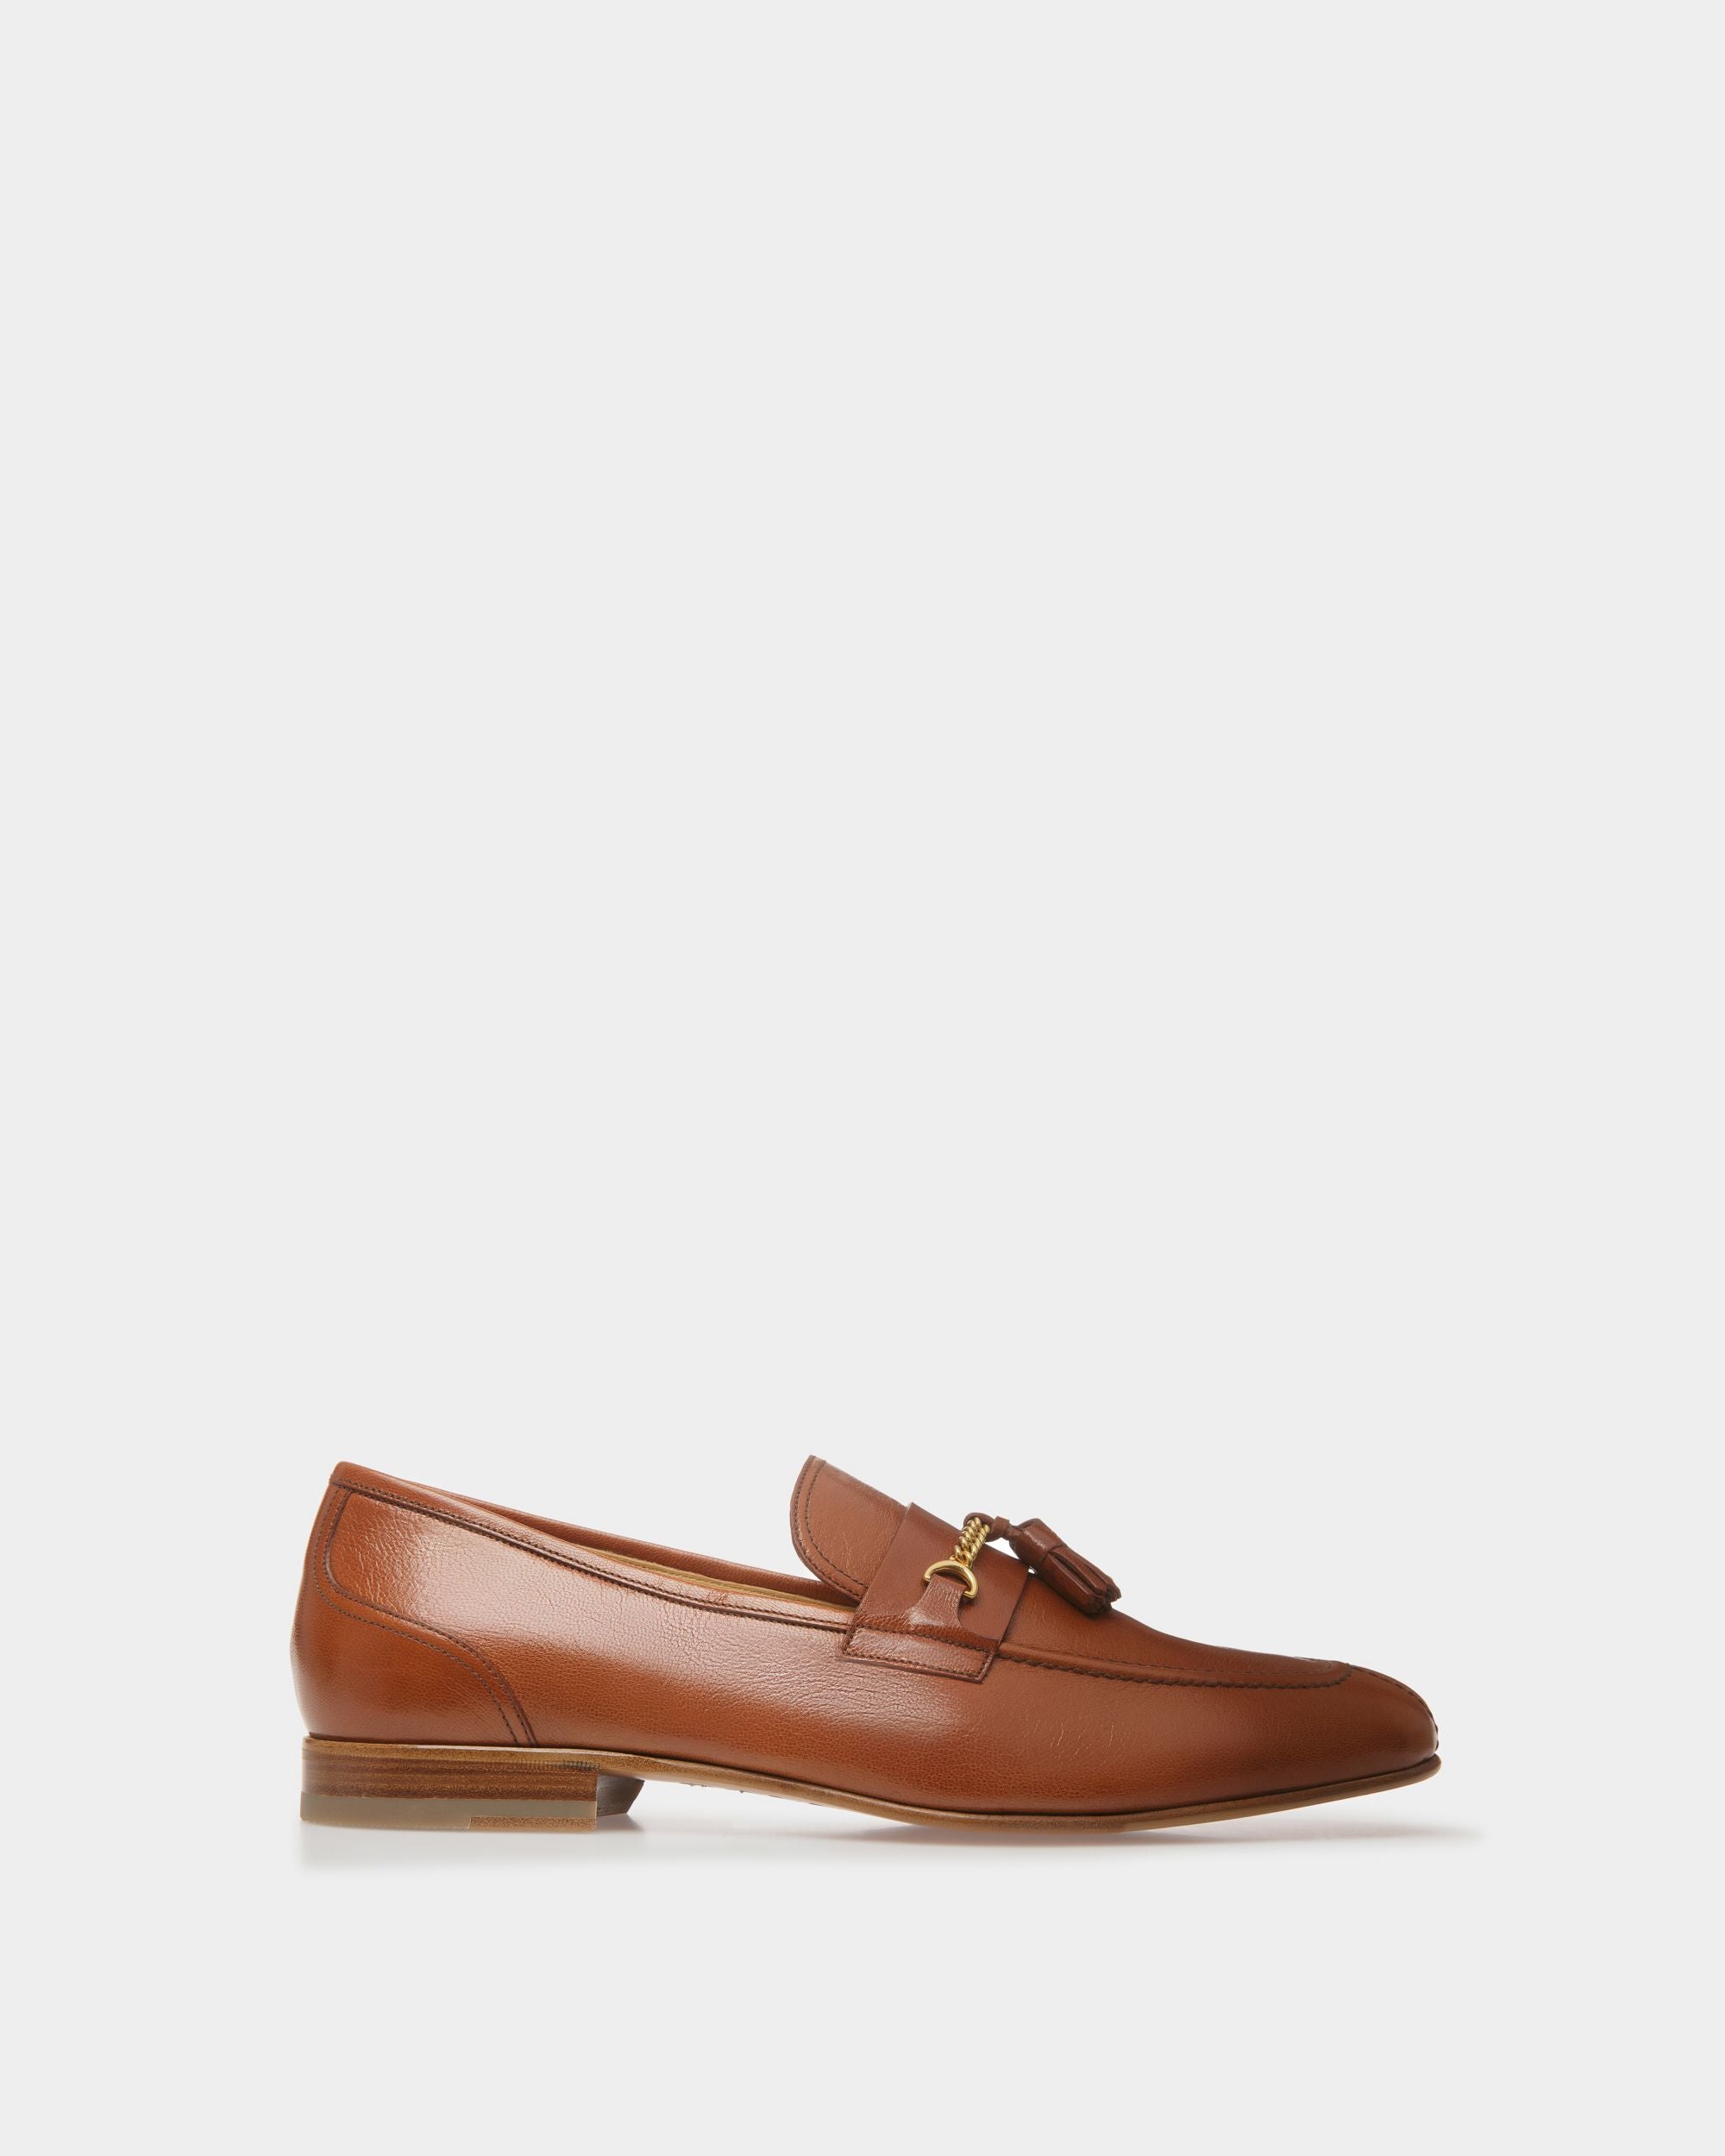 Saily | Men's Loafers | Brown Leather | Bally | Still Life Side